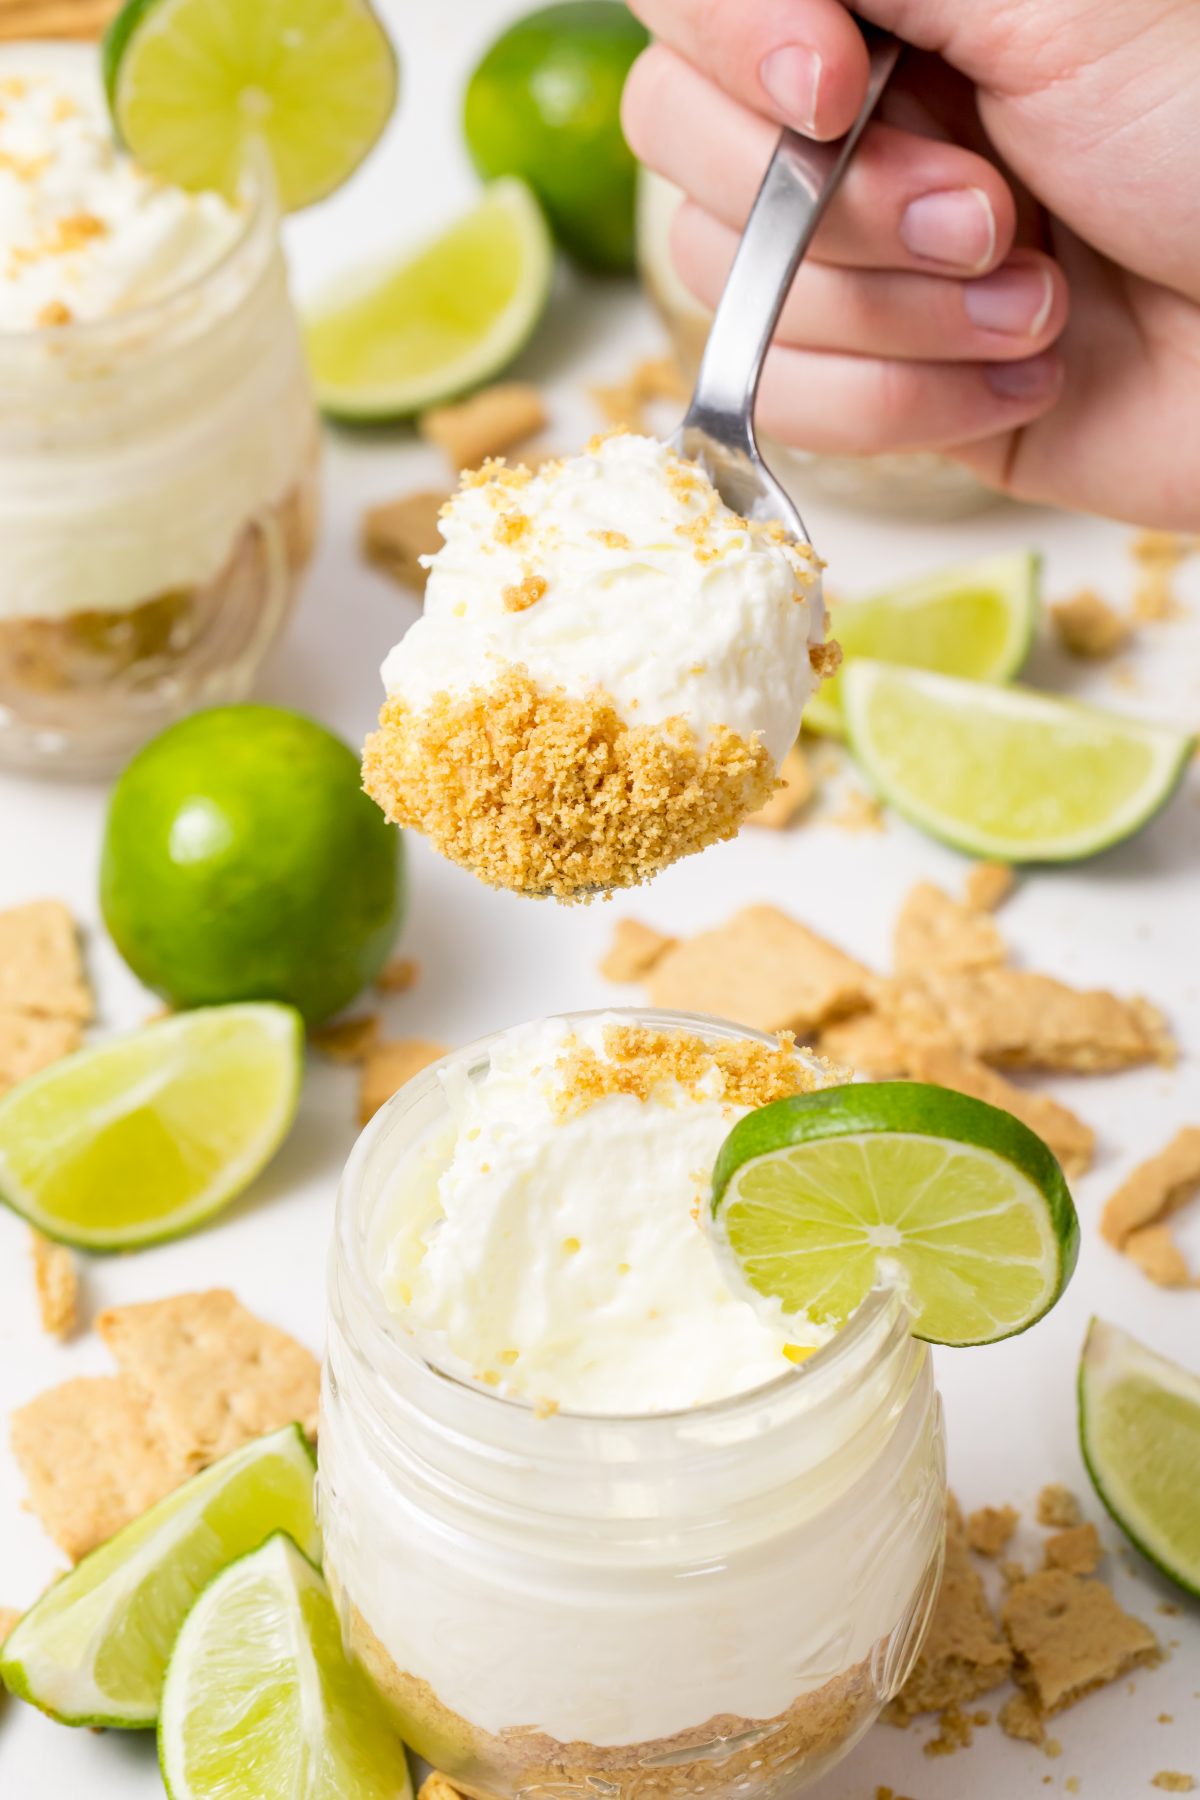 Spoon out a delicious bite of no-bake key lime pie